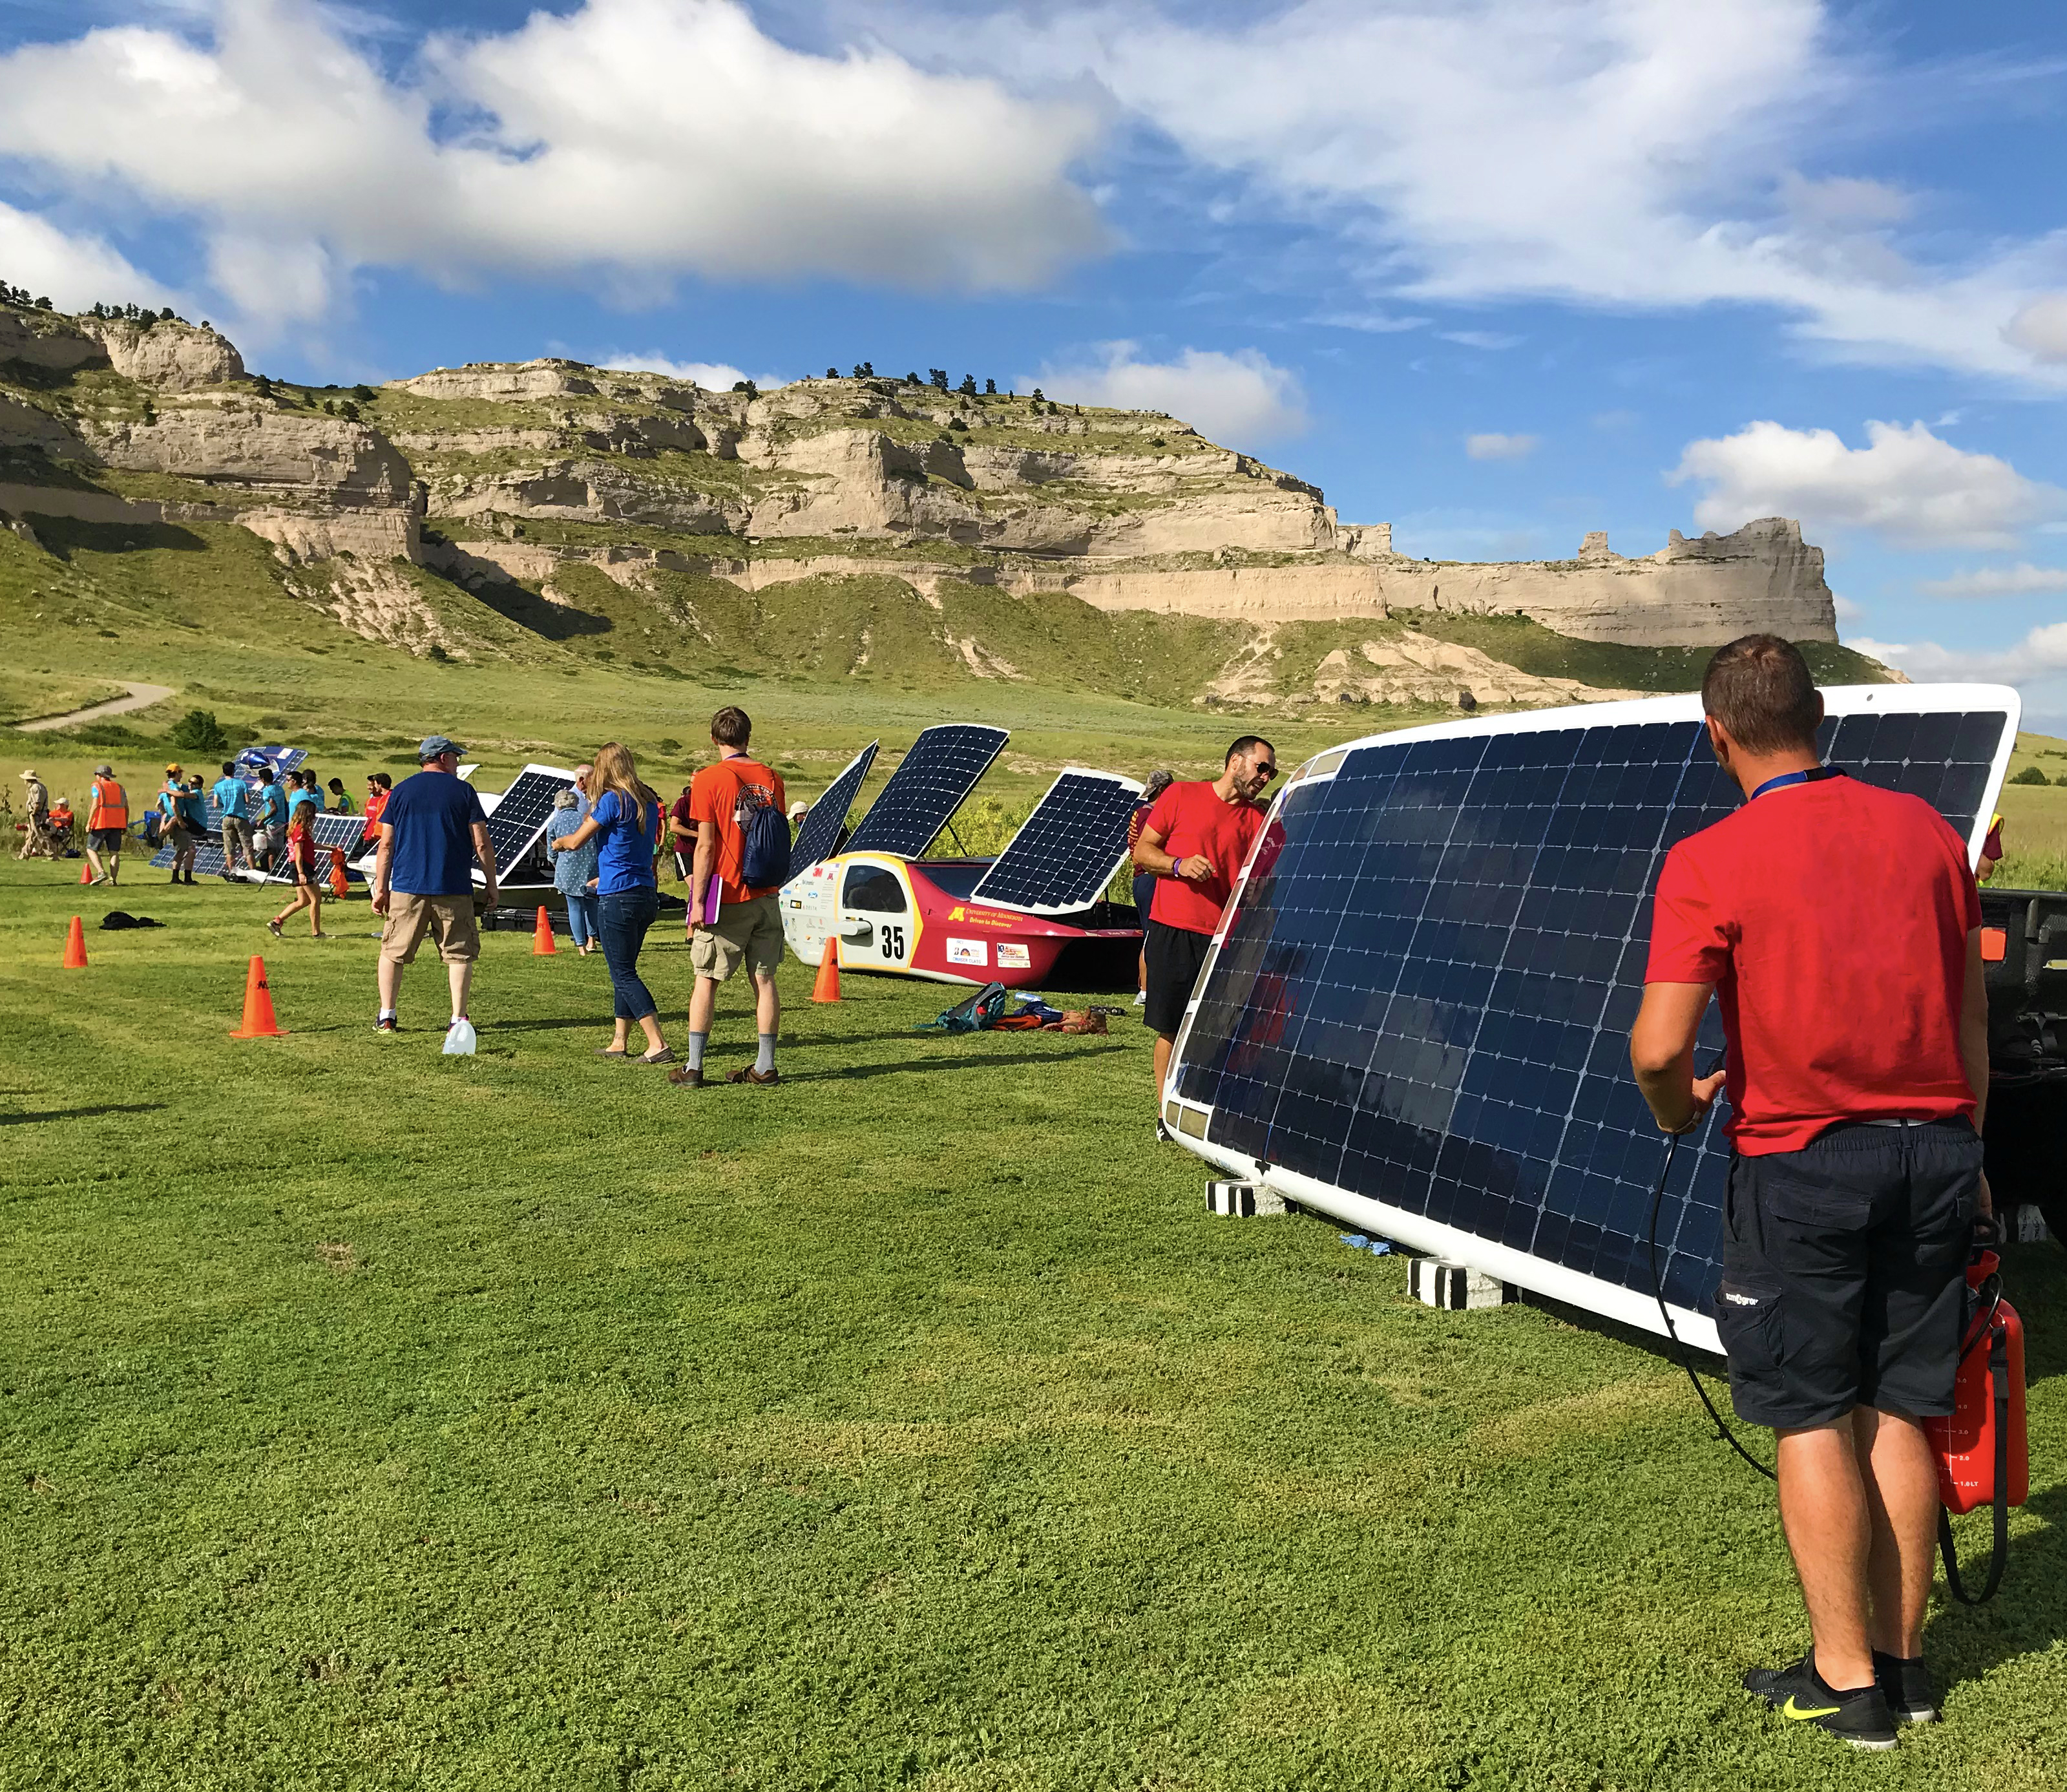 Solar cars propped up for charging on short grass with people milling about and working on the cars. A large bluff and blue skies dotted with clouds are in the background.